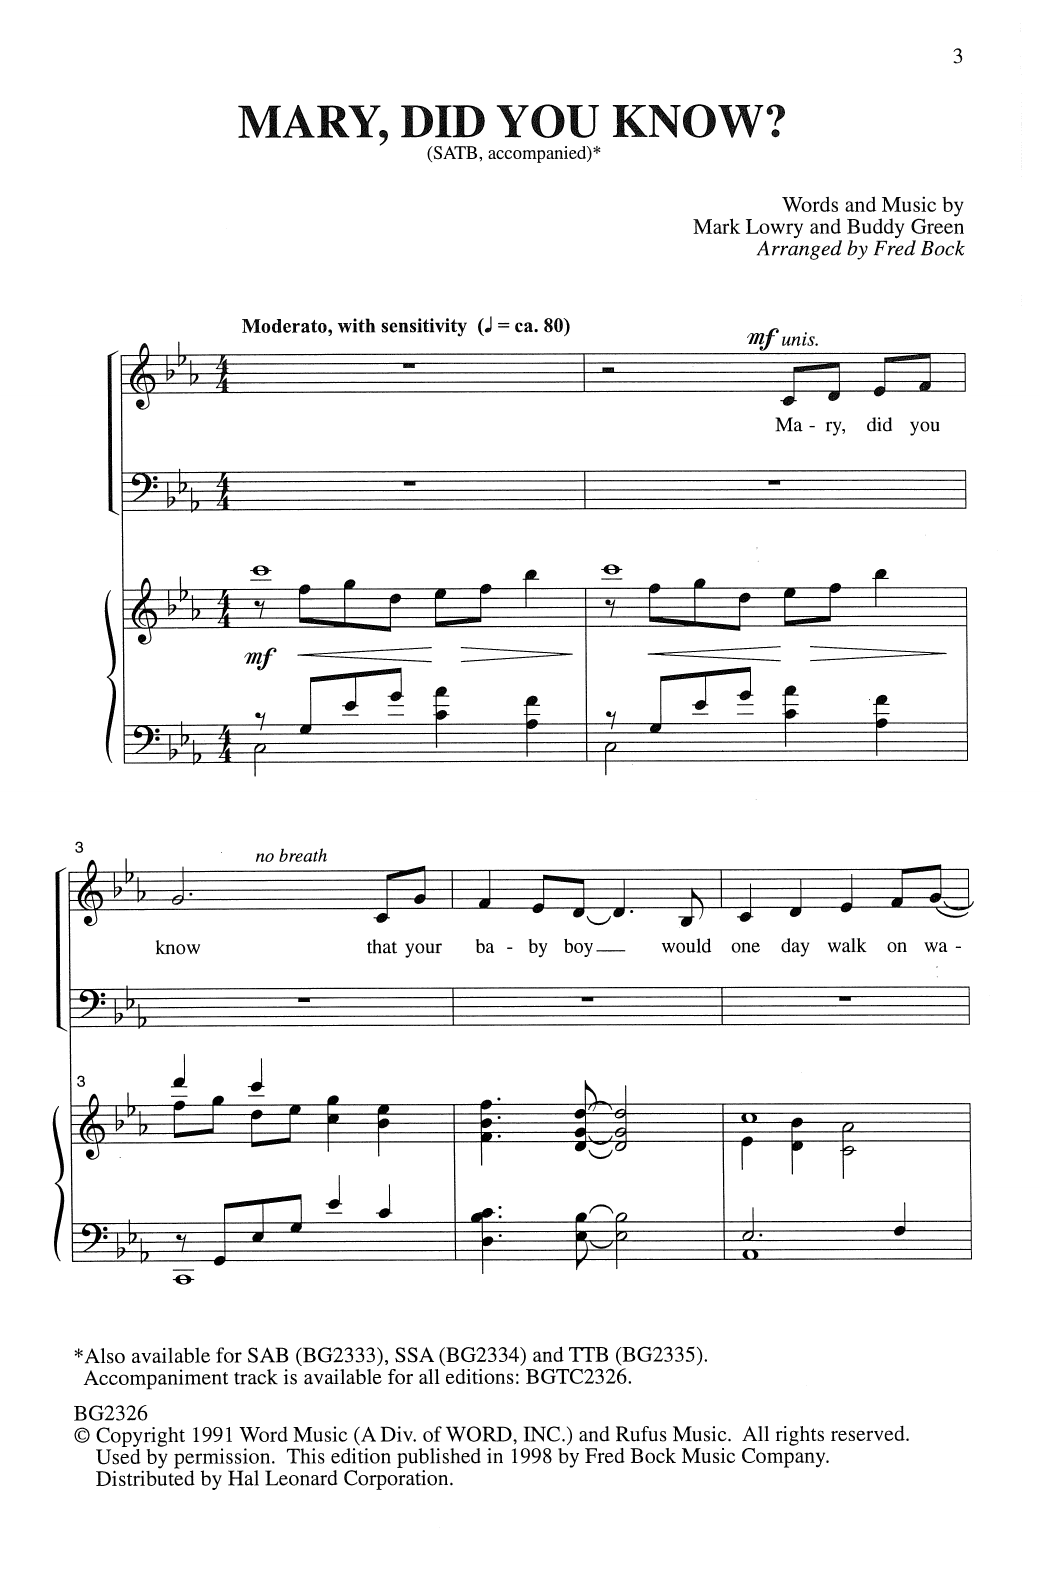 Mark Lowry Mary, Did You Know? (arr. Fred Bock) sheet music notes printable PDF score